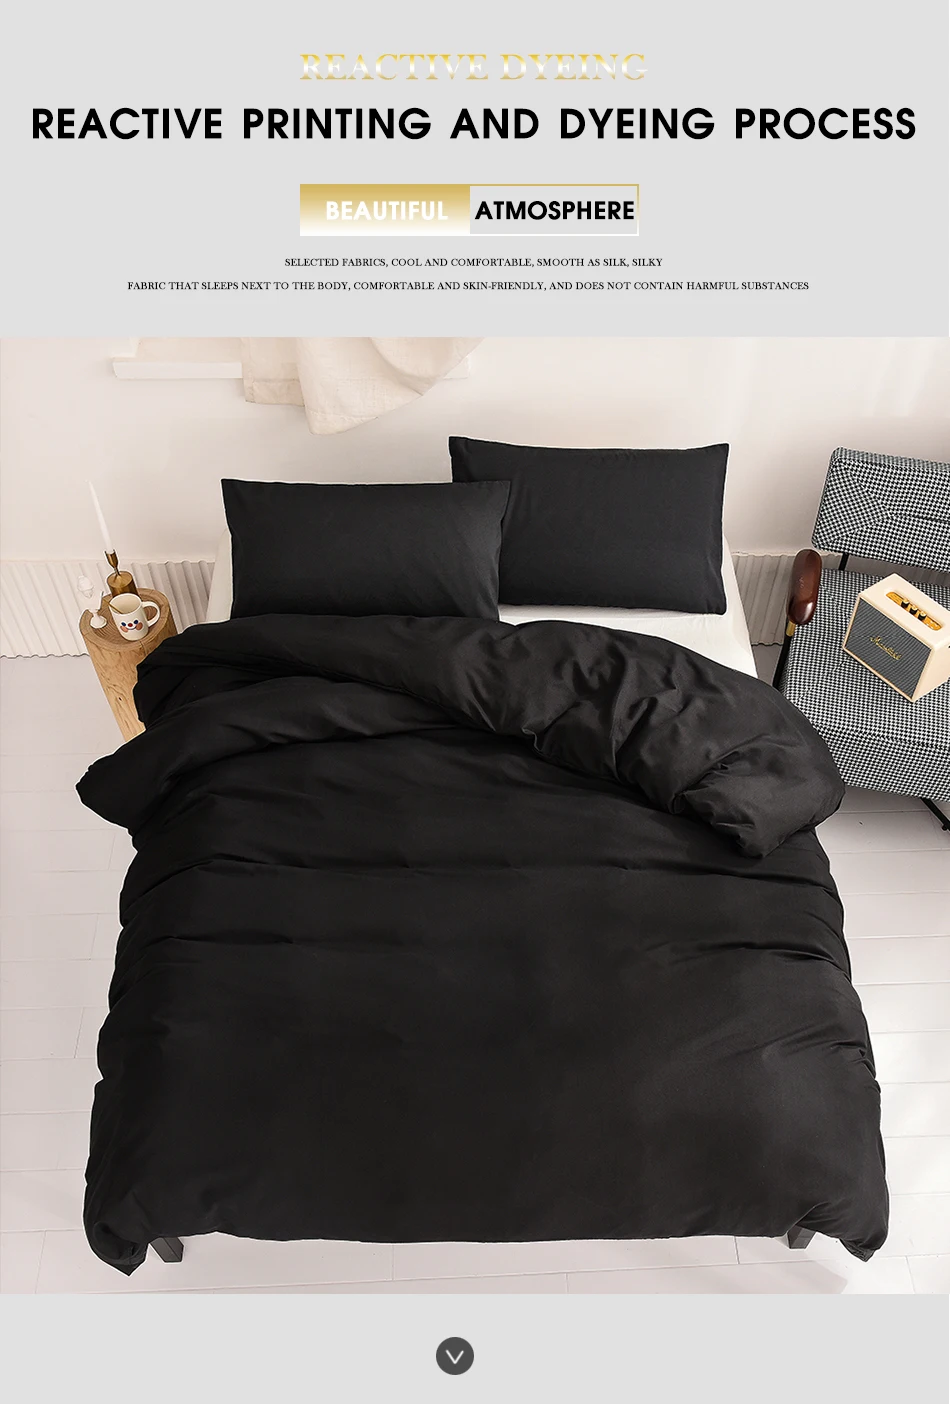 Bedding Sets for women MIDSUM Pure Color Bedding Sets Single Double Full Size Skin Friendly Fabric Black Duvet Cover Set For Dormitory Household king size comforter